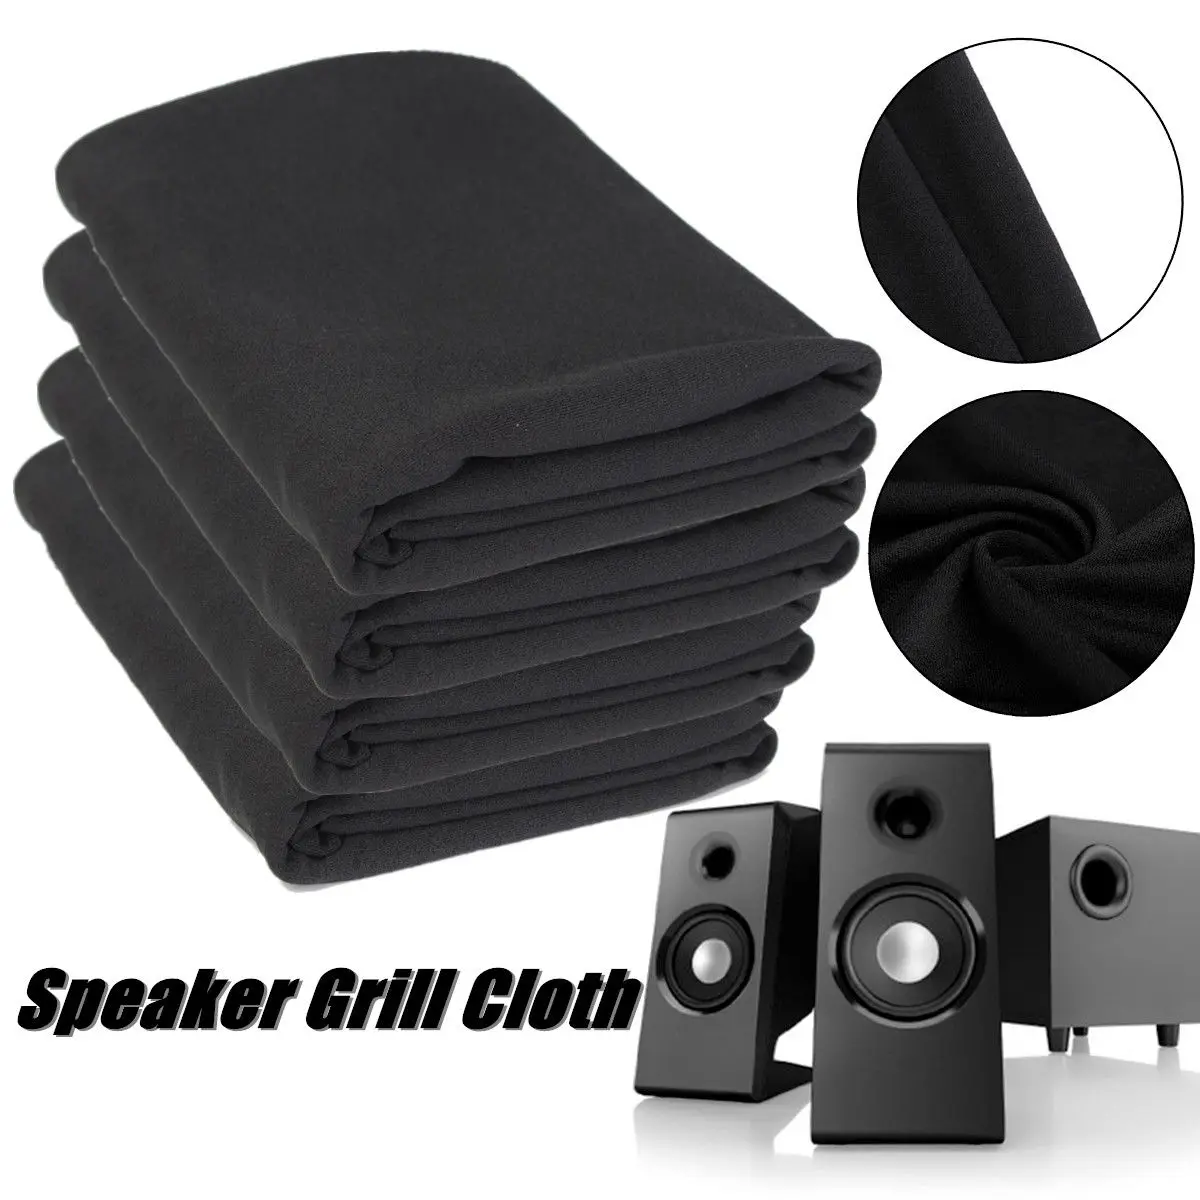 Valace Speaker Grill Cloth Stereo Mesh Fabric Speaker Speaker Grill Cloth Stereo Gille Fabric Speaker Mesh Cloth Prevent Dust